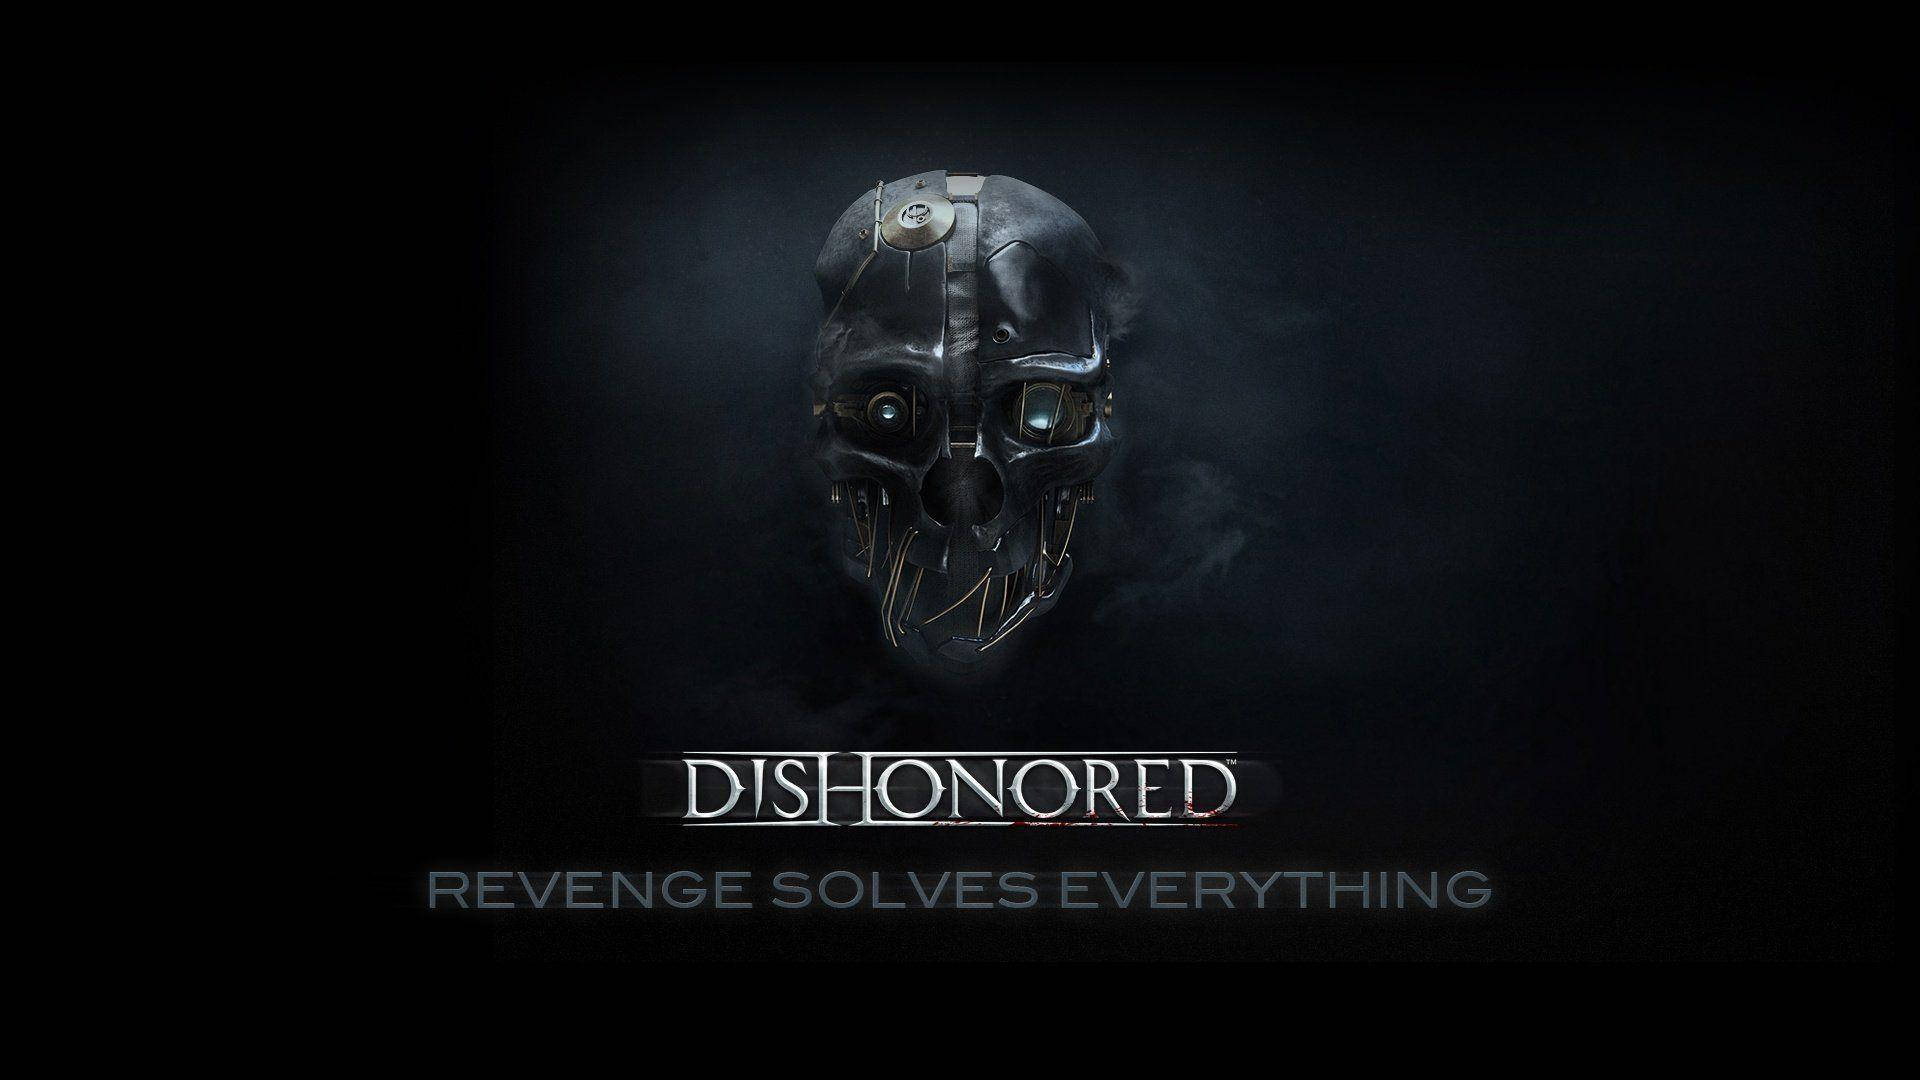 Dishonored Revenge Quote Background